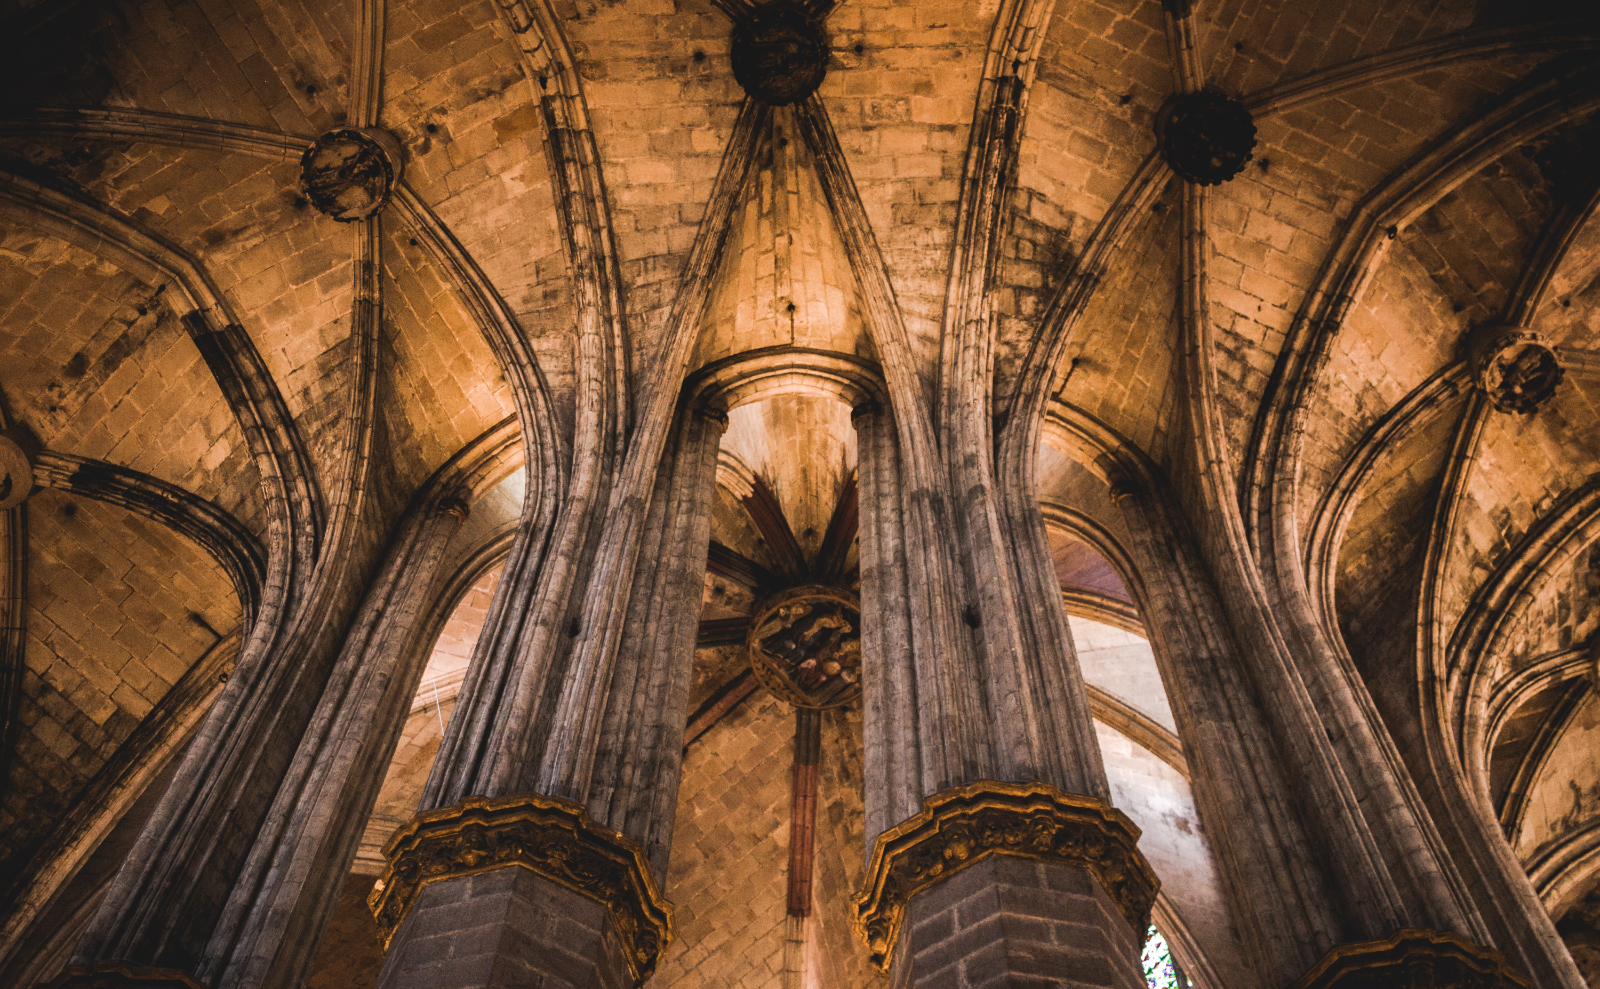 vaulted gothic ceiling of the basilica of santa maria del mar in barcelona, spain